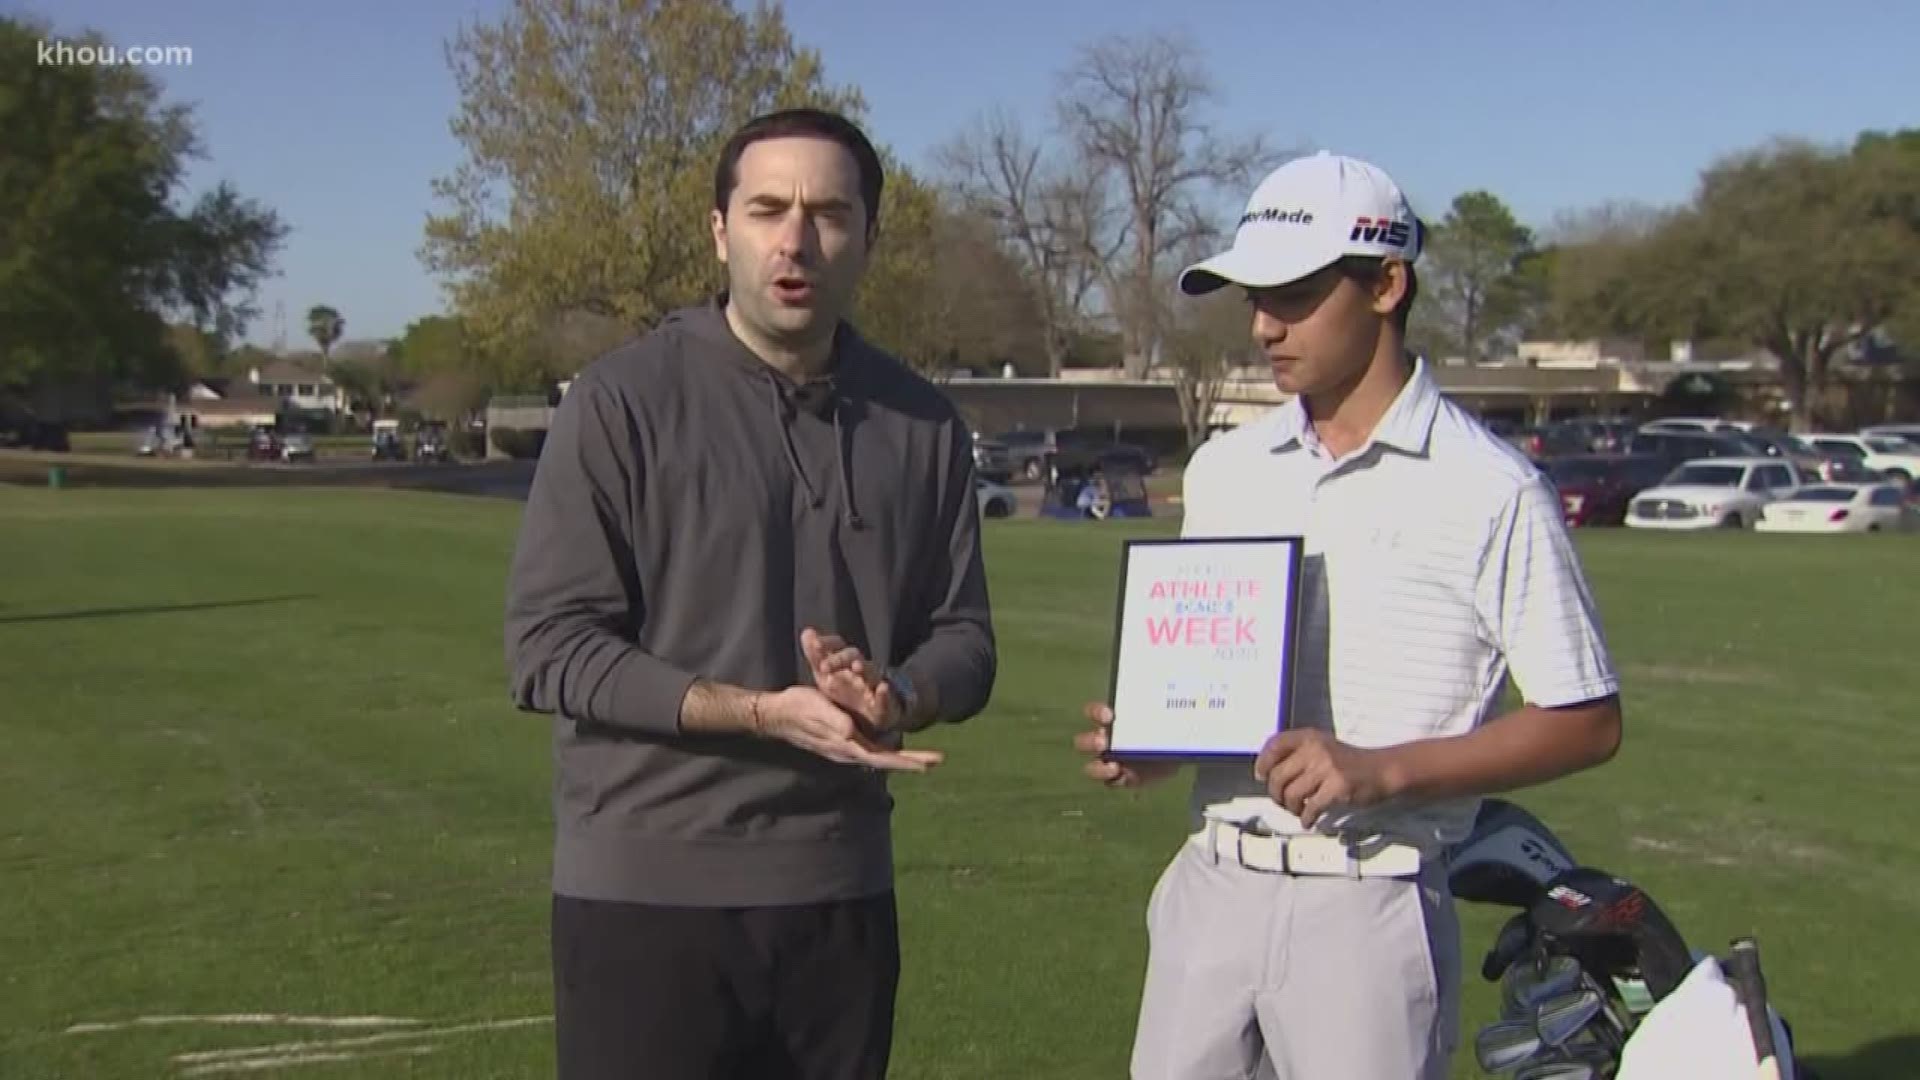 Jaivir Pande learned the game of golf halfway around the world and is perfecting the craft in Houston.